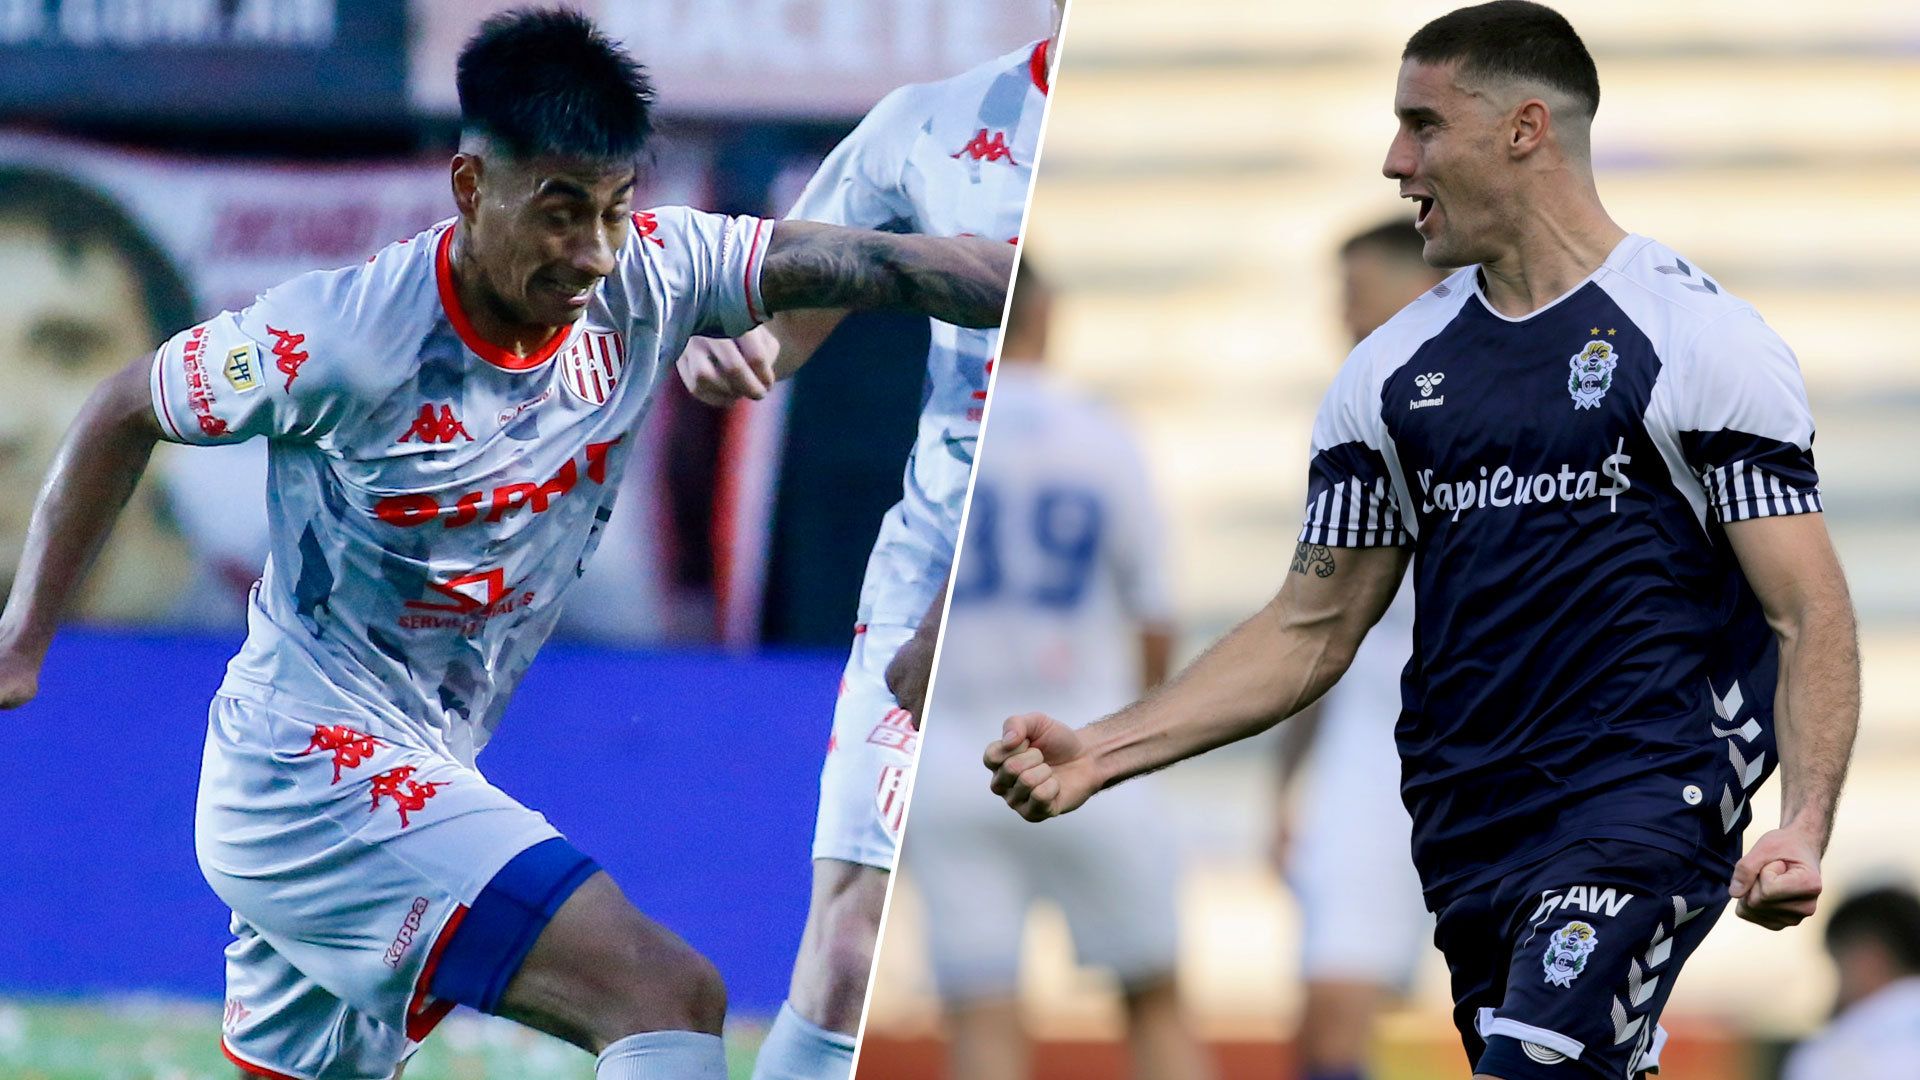 Unión and Gimnasia seek to approach the top of the championship